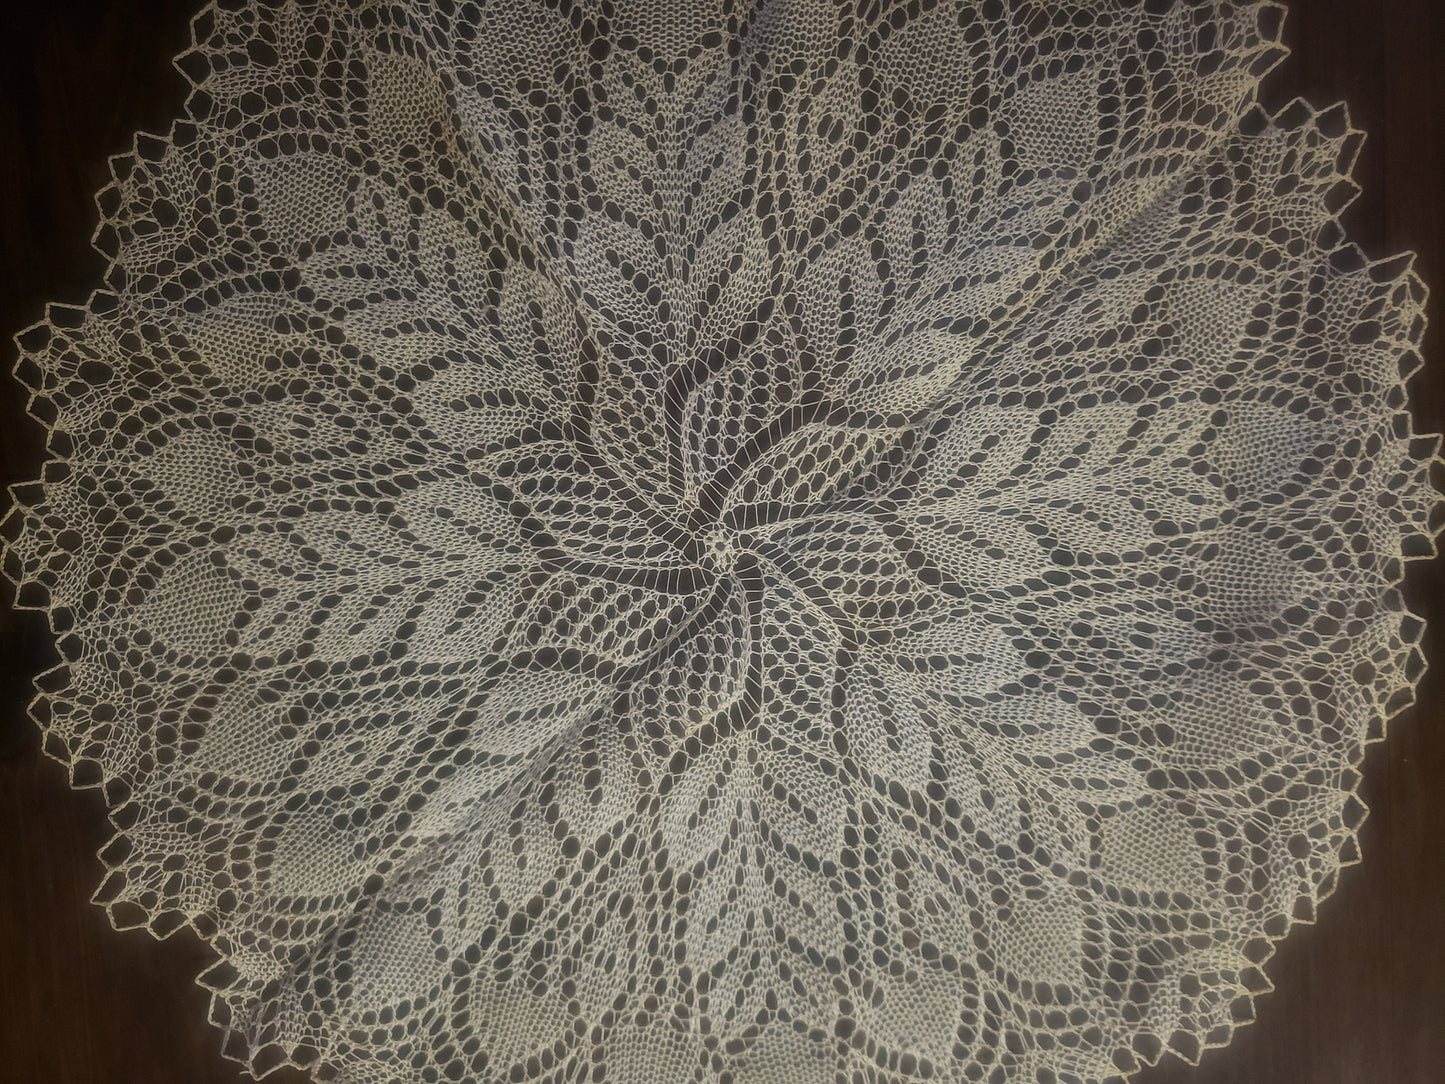 Vintage Handmade Crocheted Lace Doily